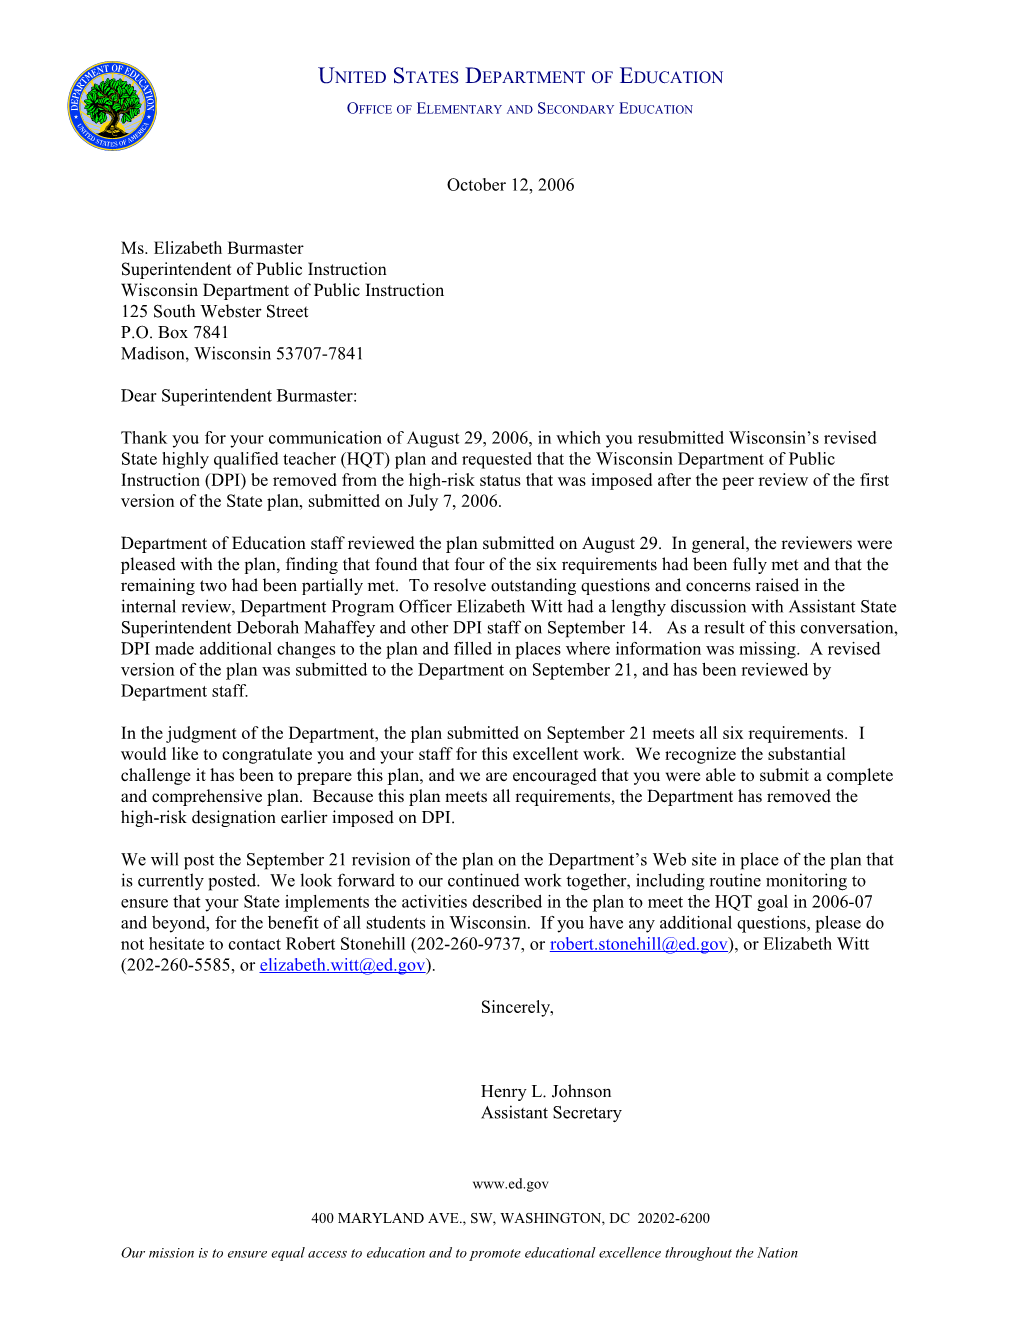 Letter to Wisconsin Superintendent of Education Regarding Highly Qualified Teacher Plan